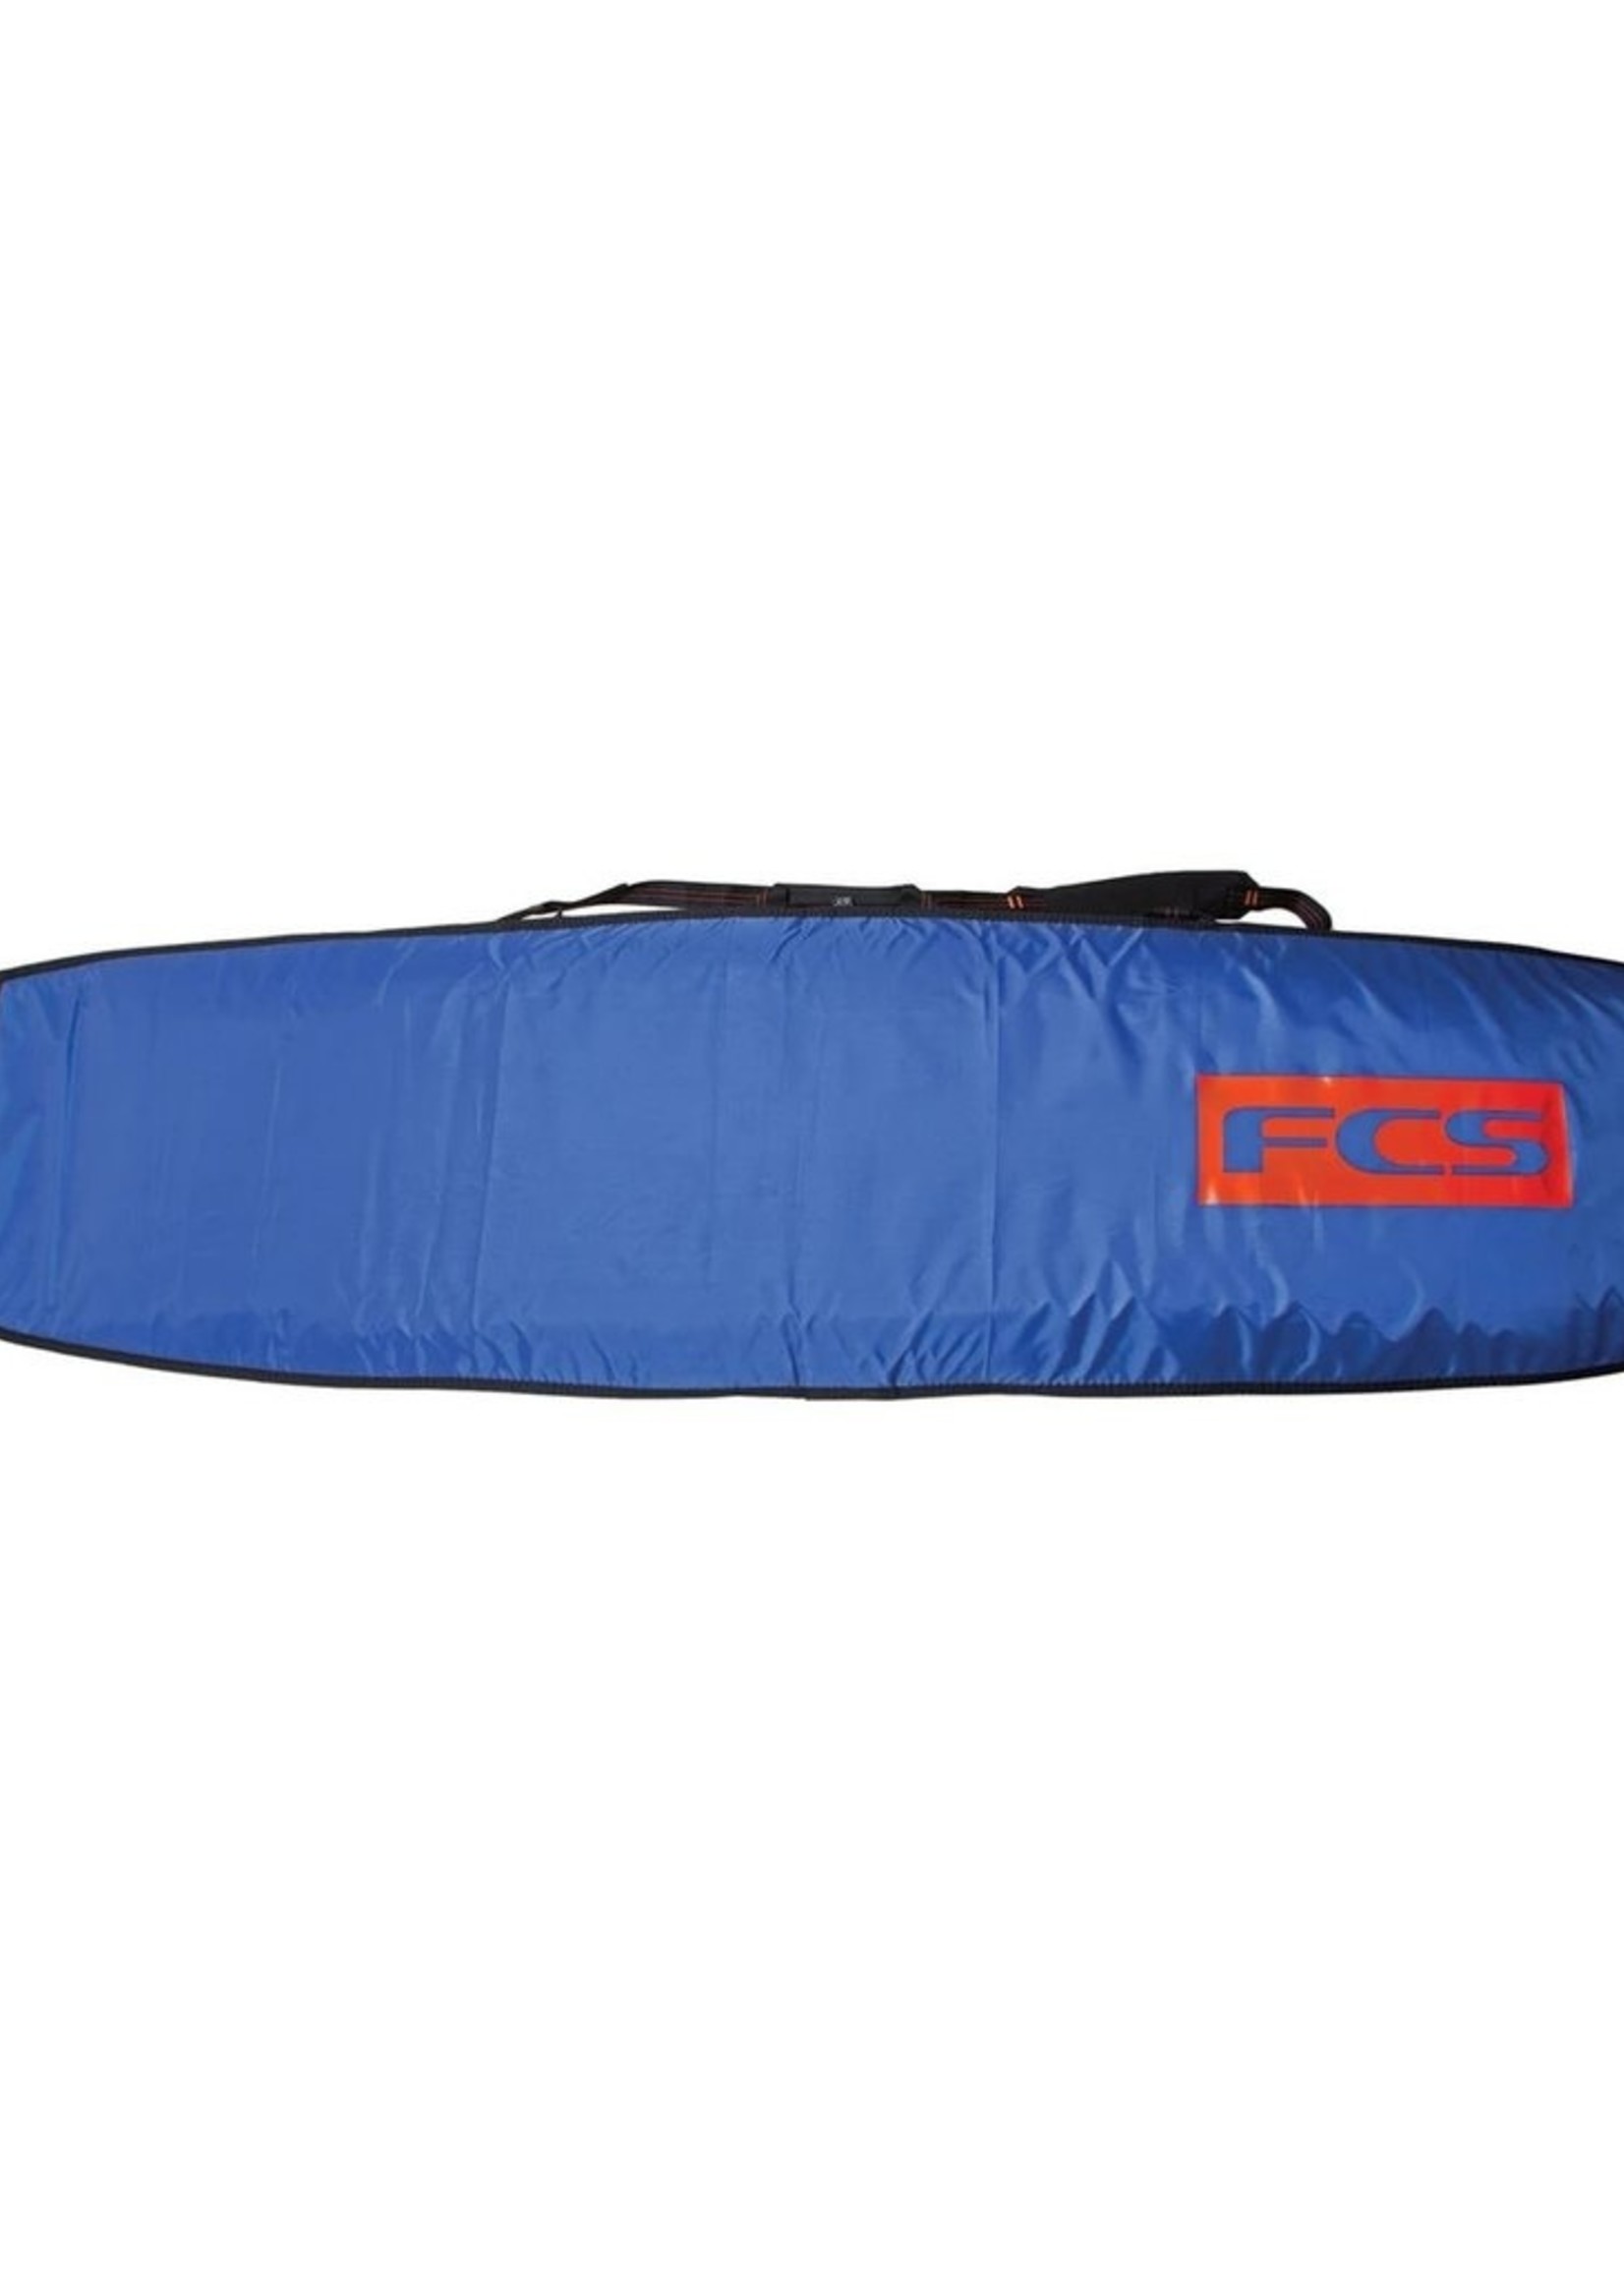 FCS FCS Classic Funboard Bags 8 foot Steel-Blue White